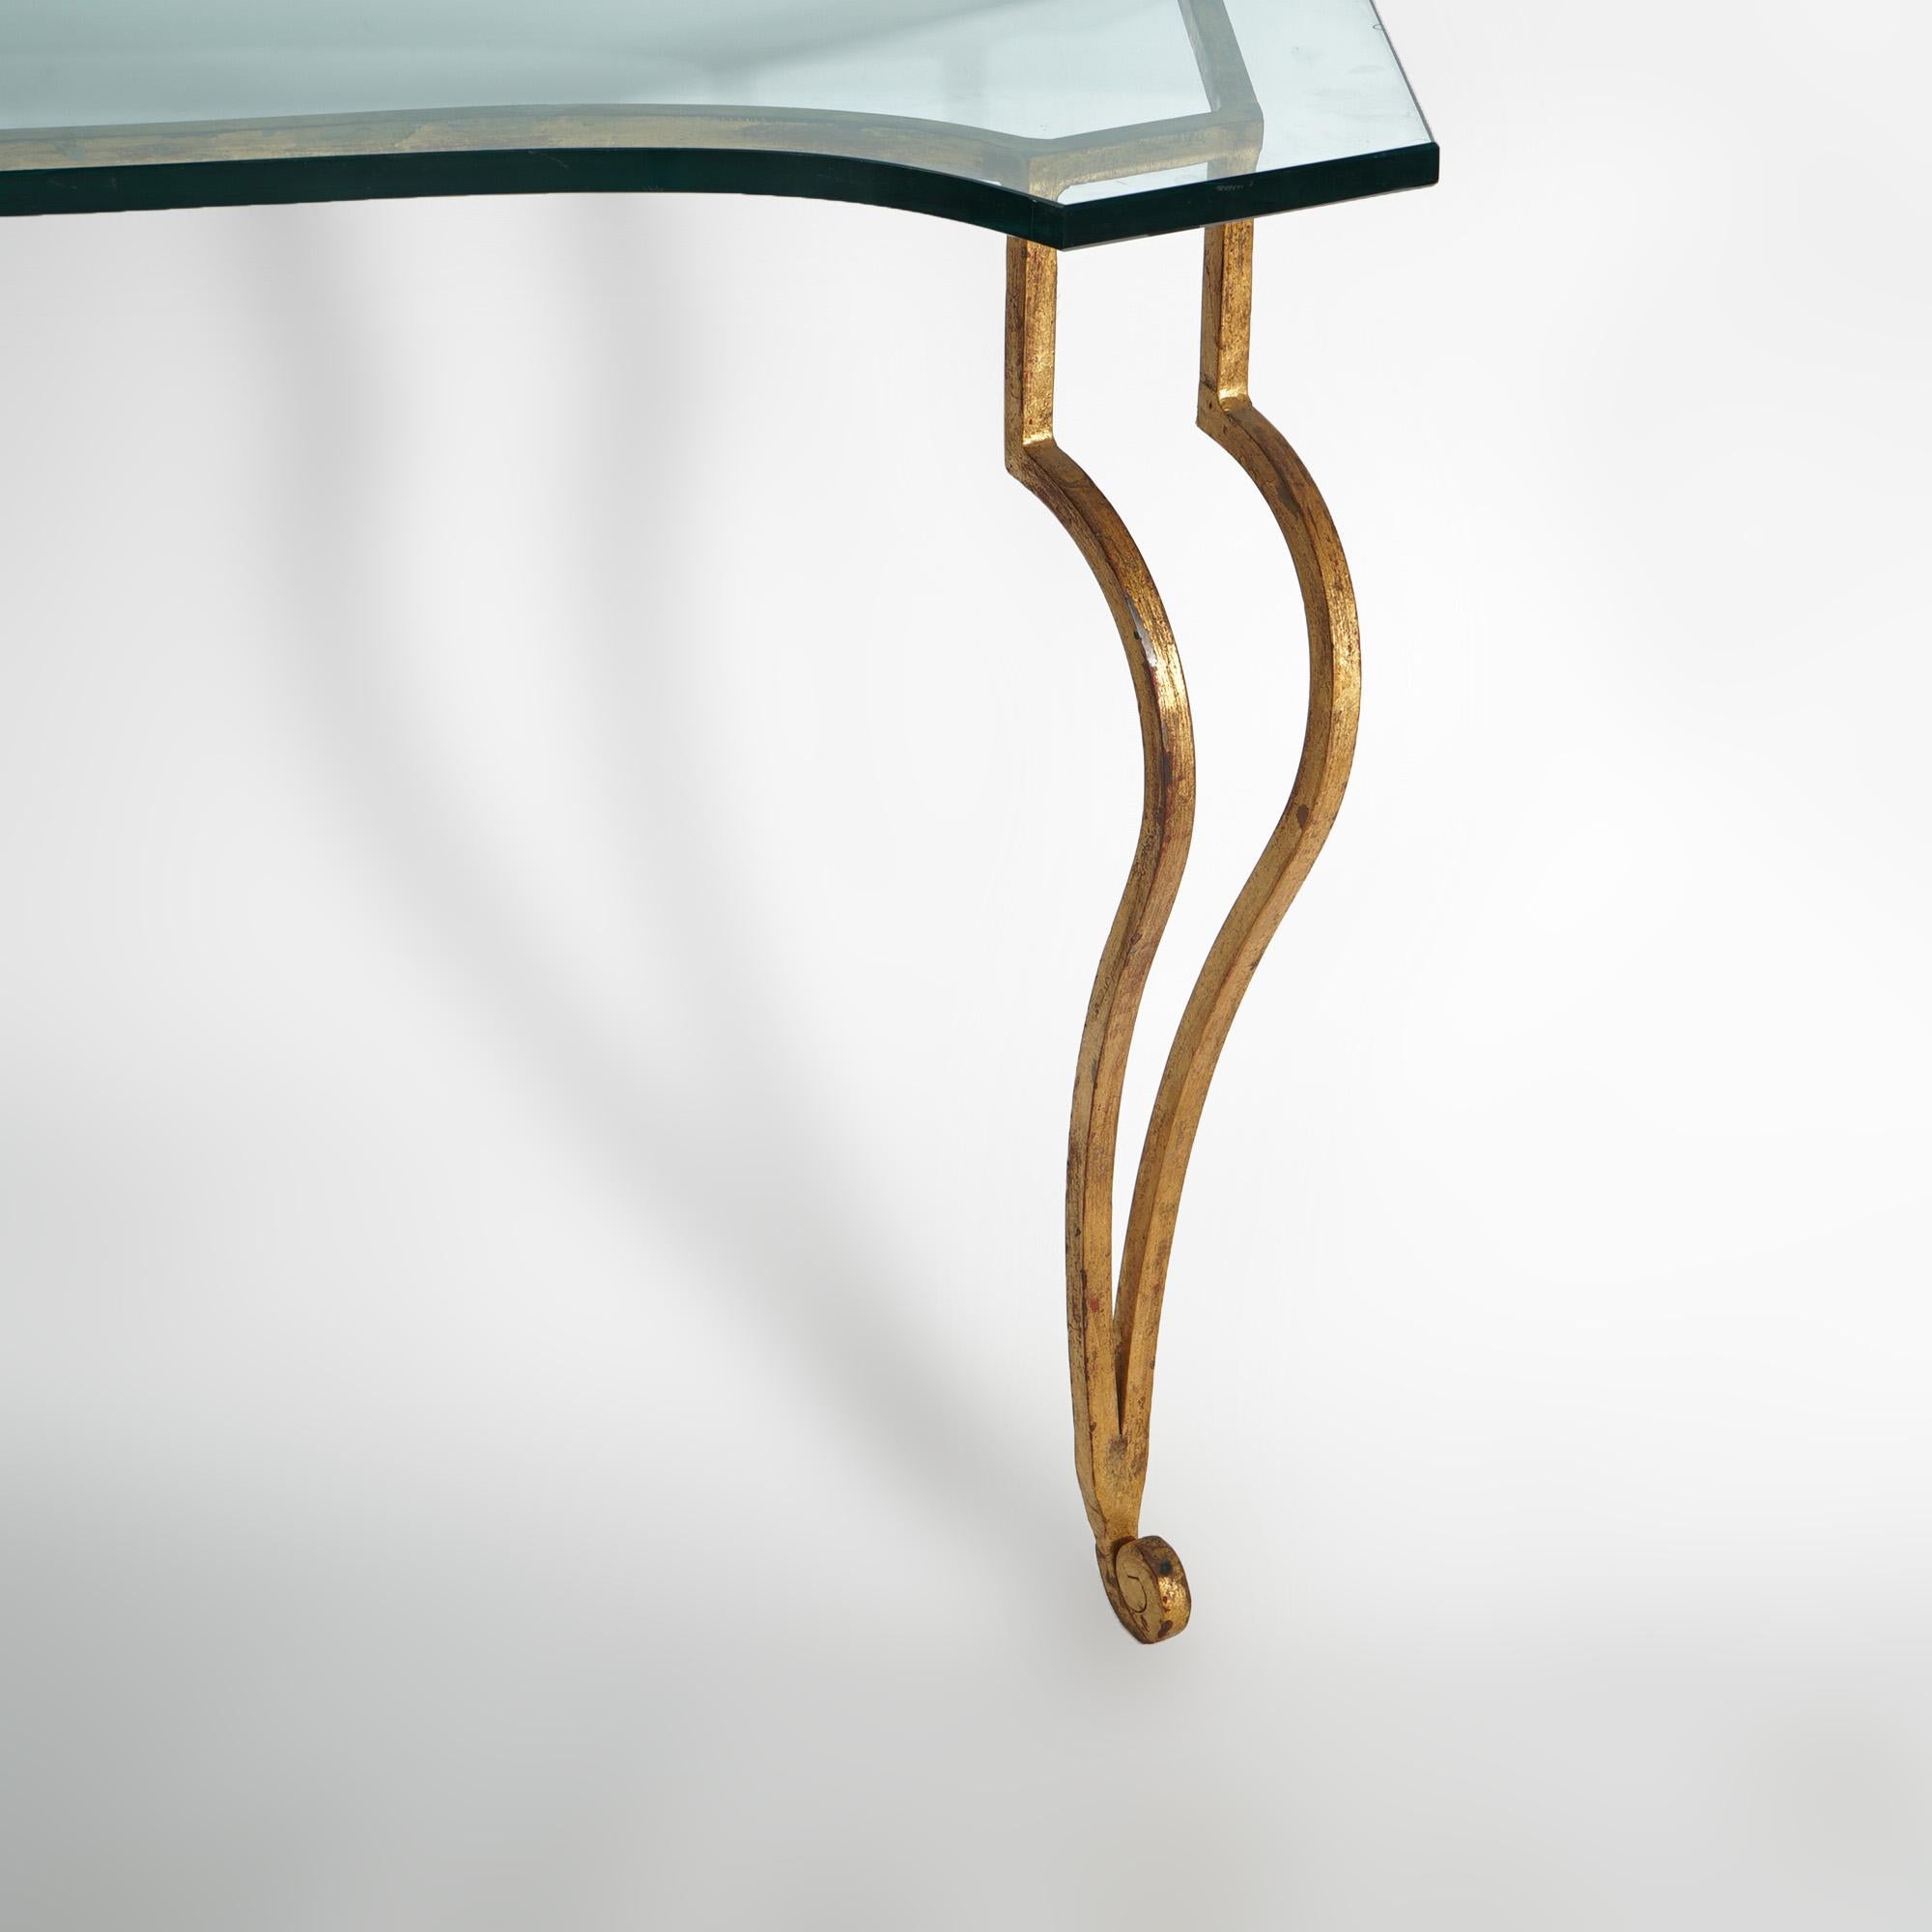 Italian Gold Gilt Wrought Iron Console Table with Glass Top 20th C For Sale 7